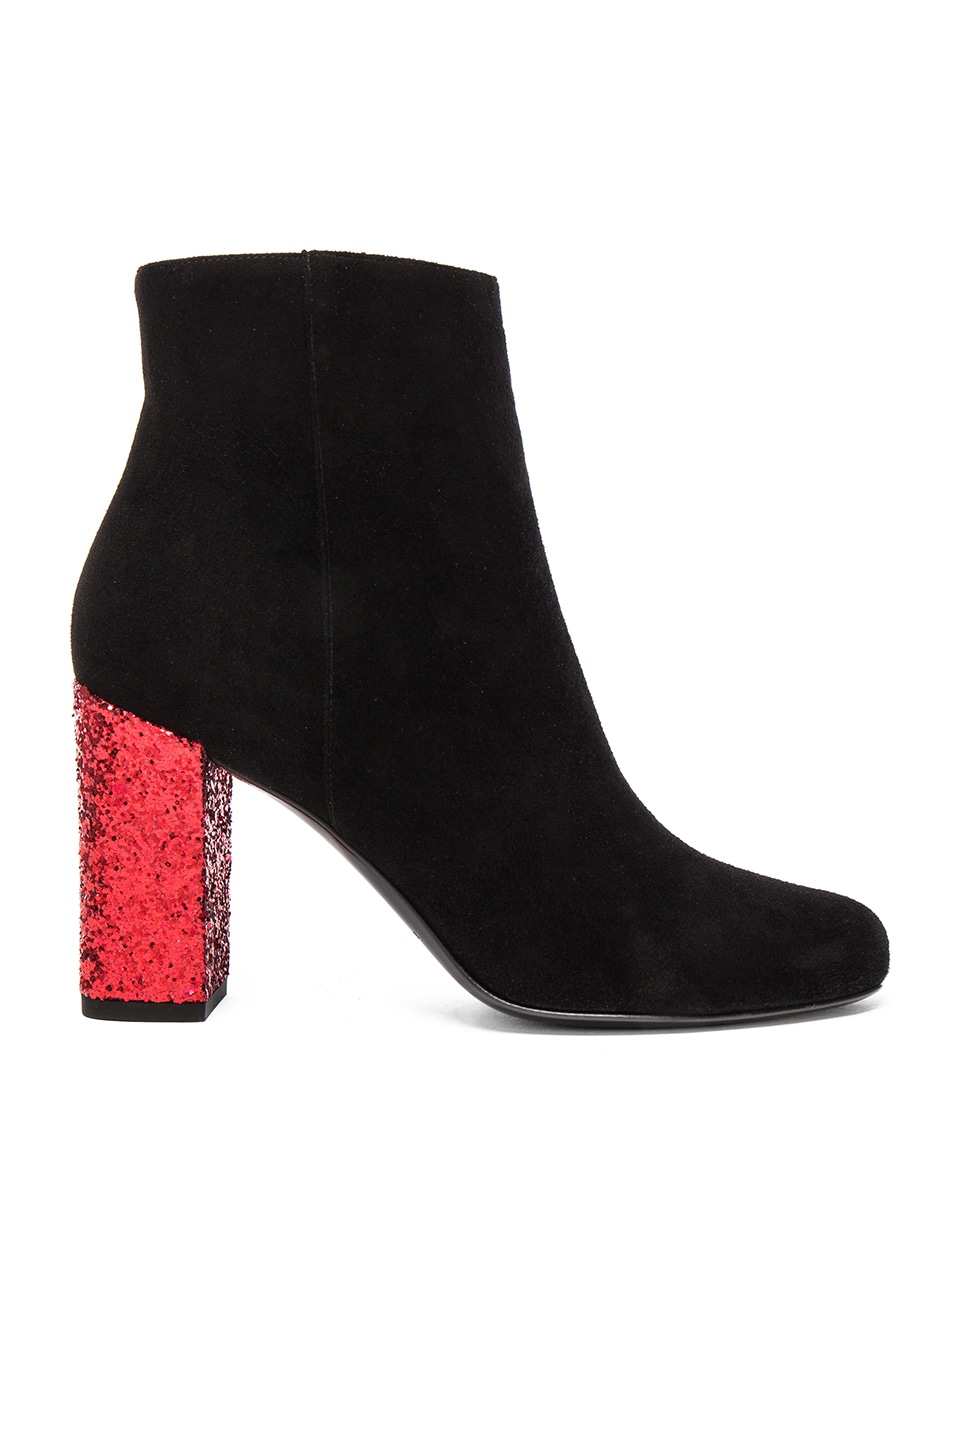 Image 1 of Saint Laurent Babies Suede & Glitter Boots in Black & Red